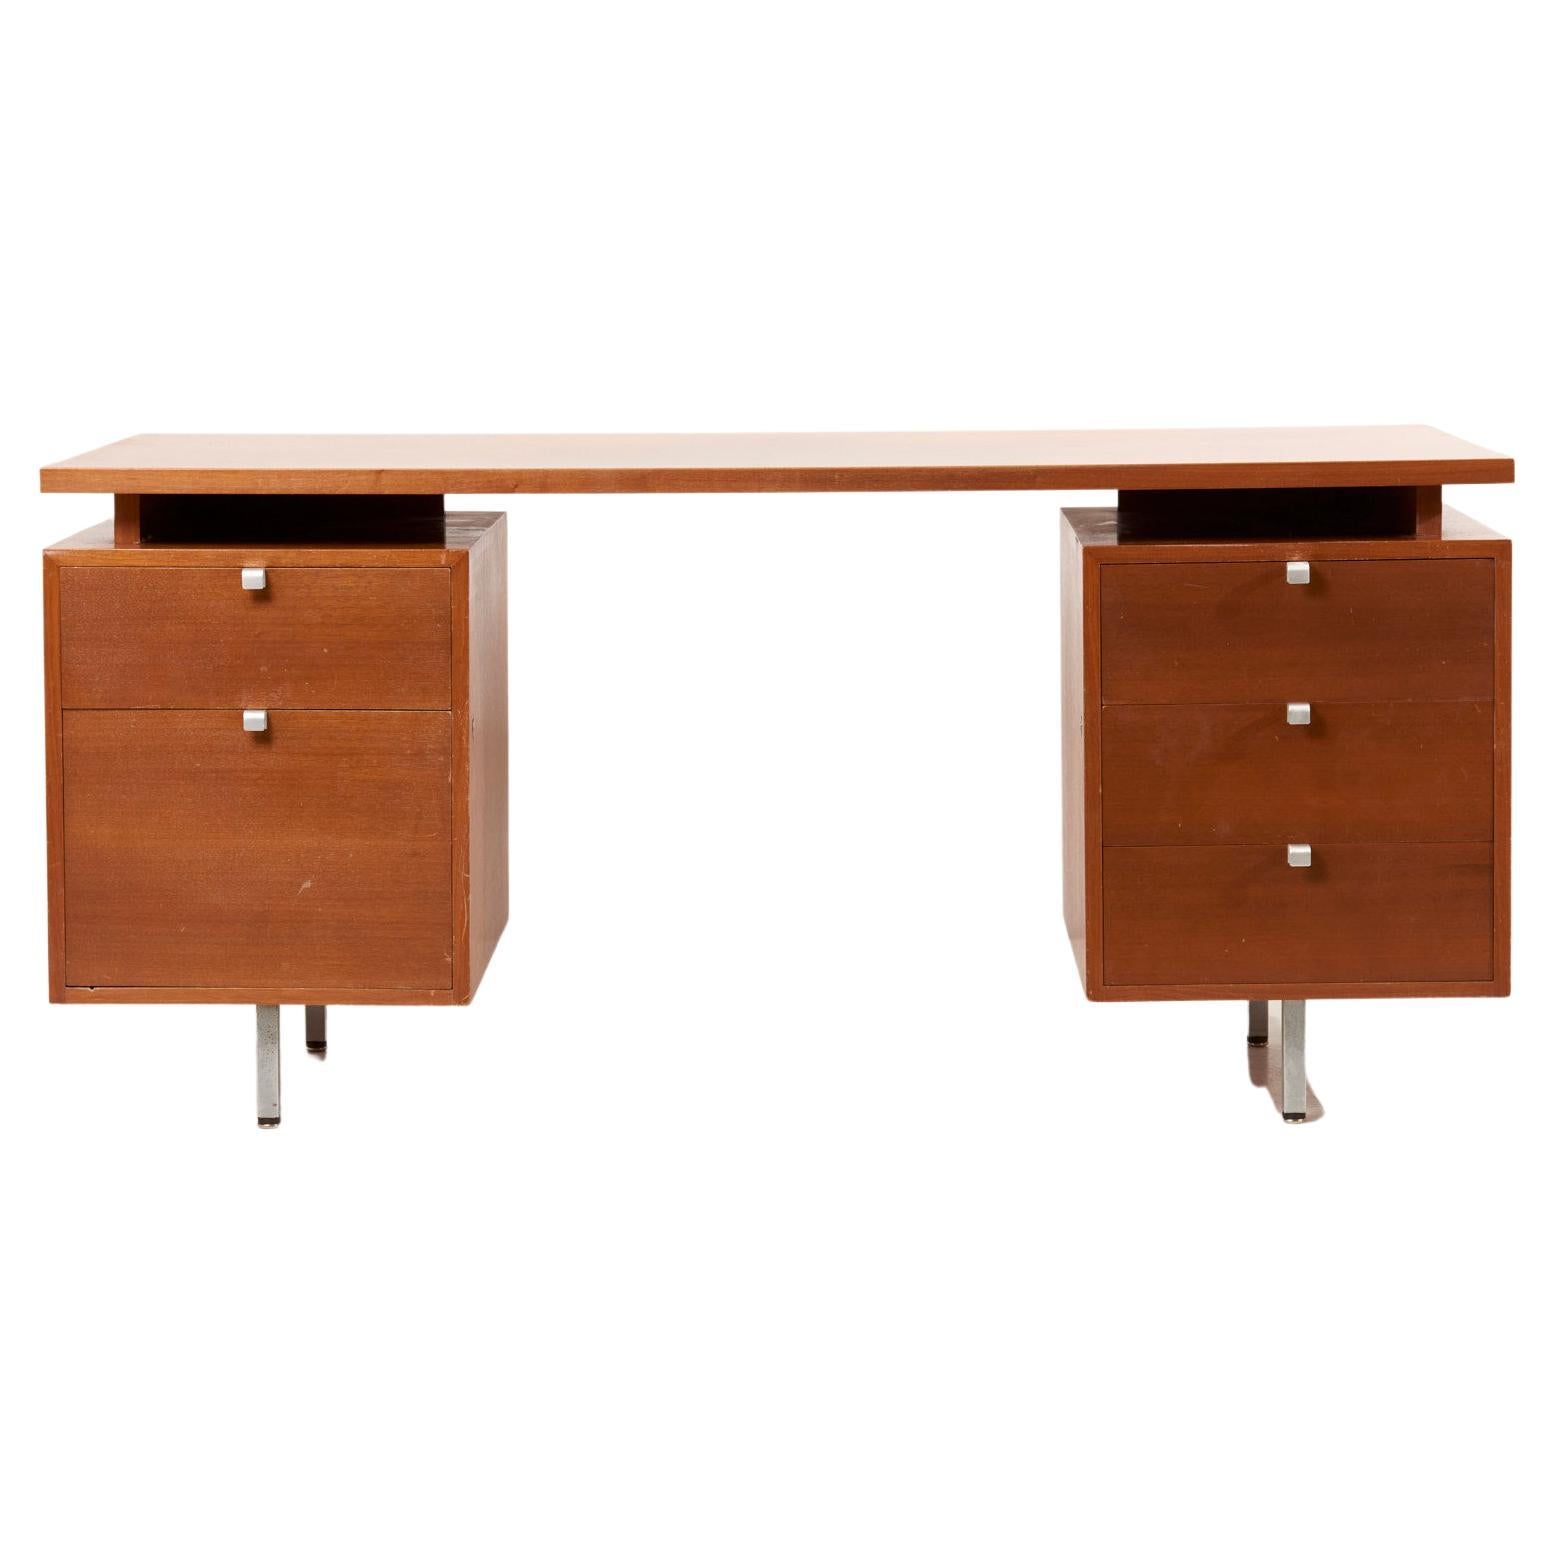 George Nelson Desk for Herman Miller, 1960s
The Top has a very floating appearance.